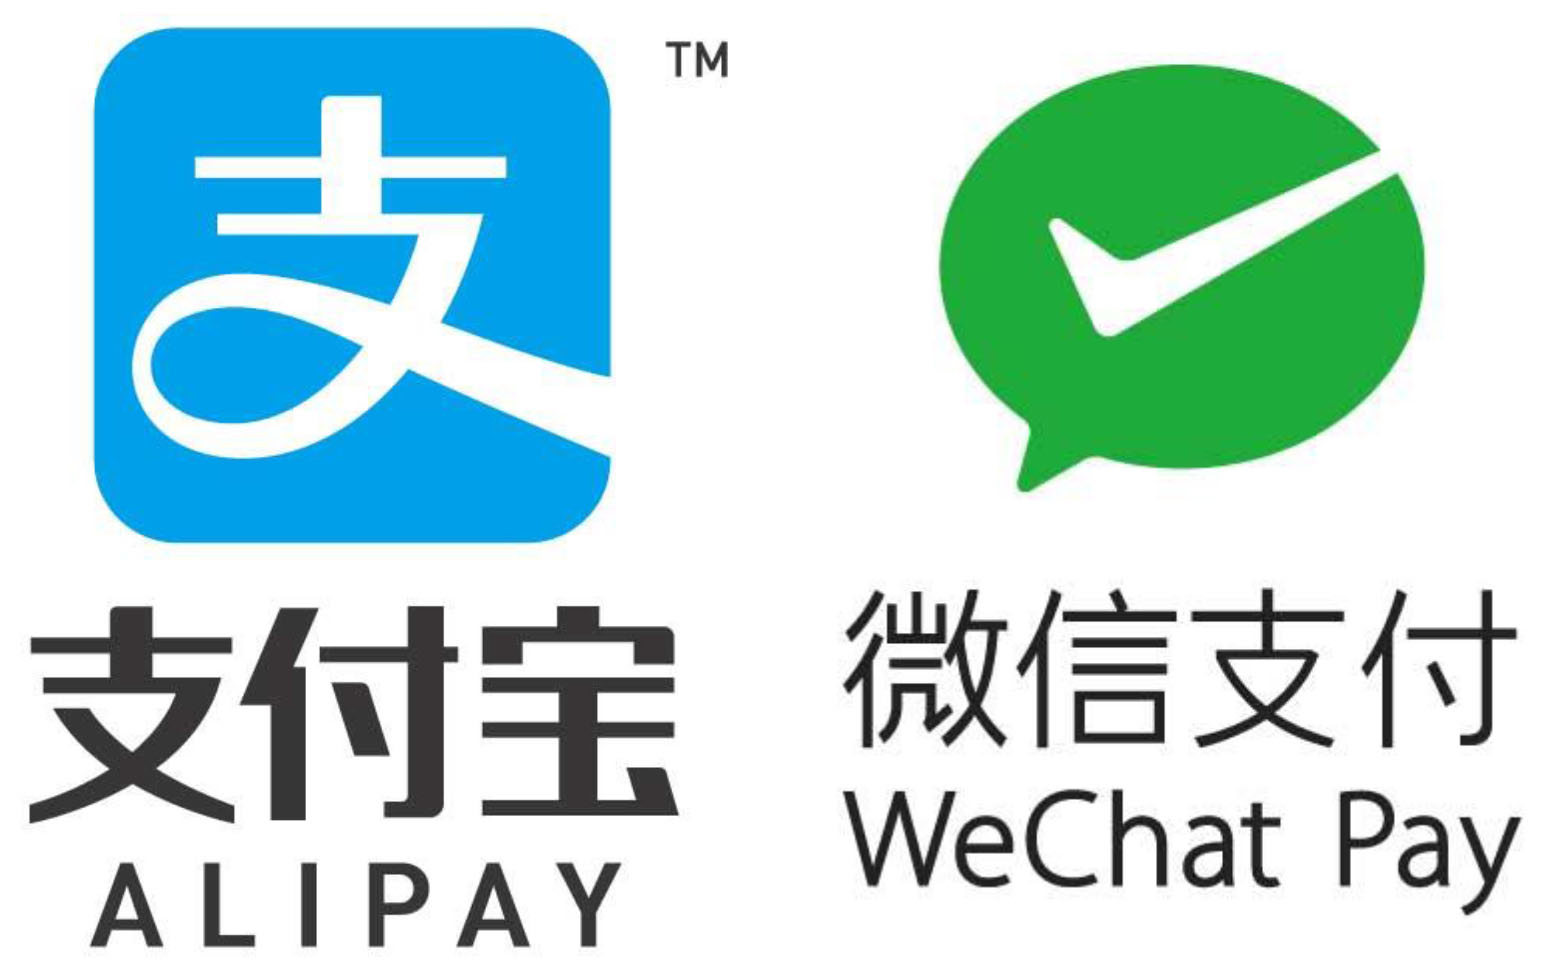 Integration of payment WeChat Pay and AliPay for China